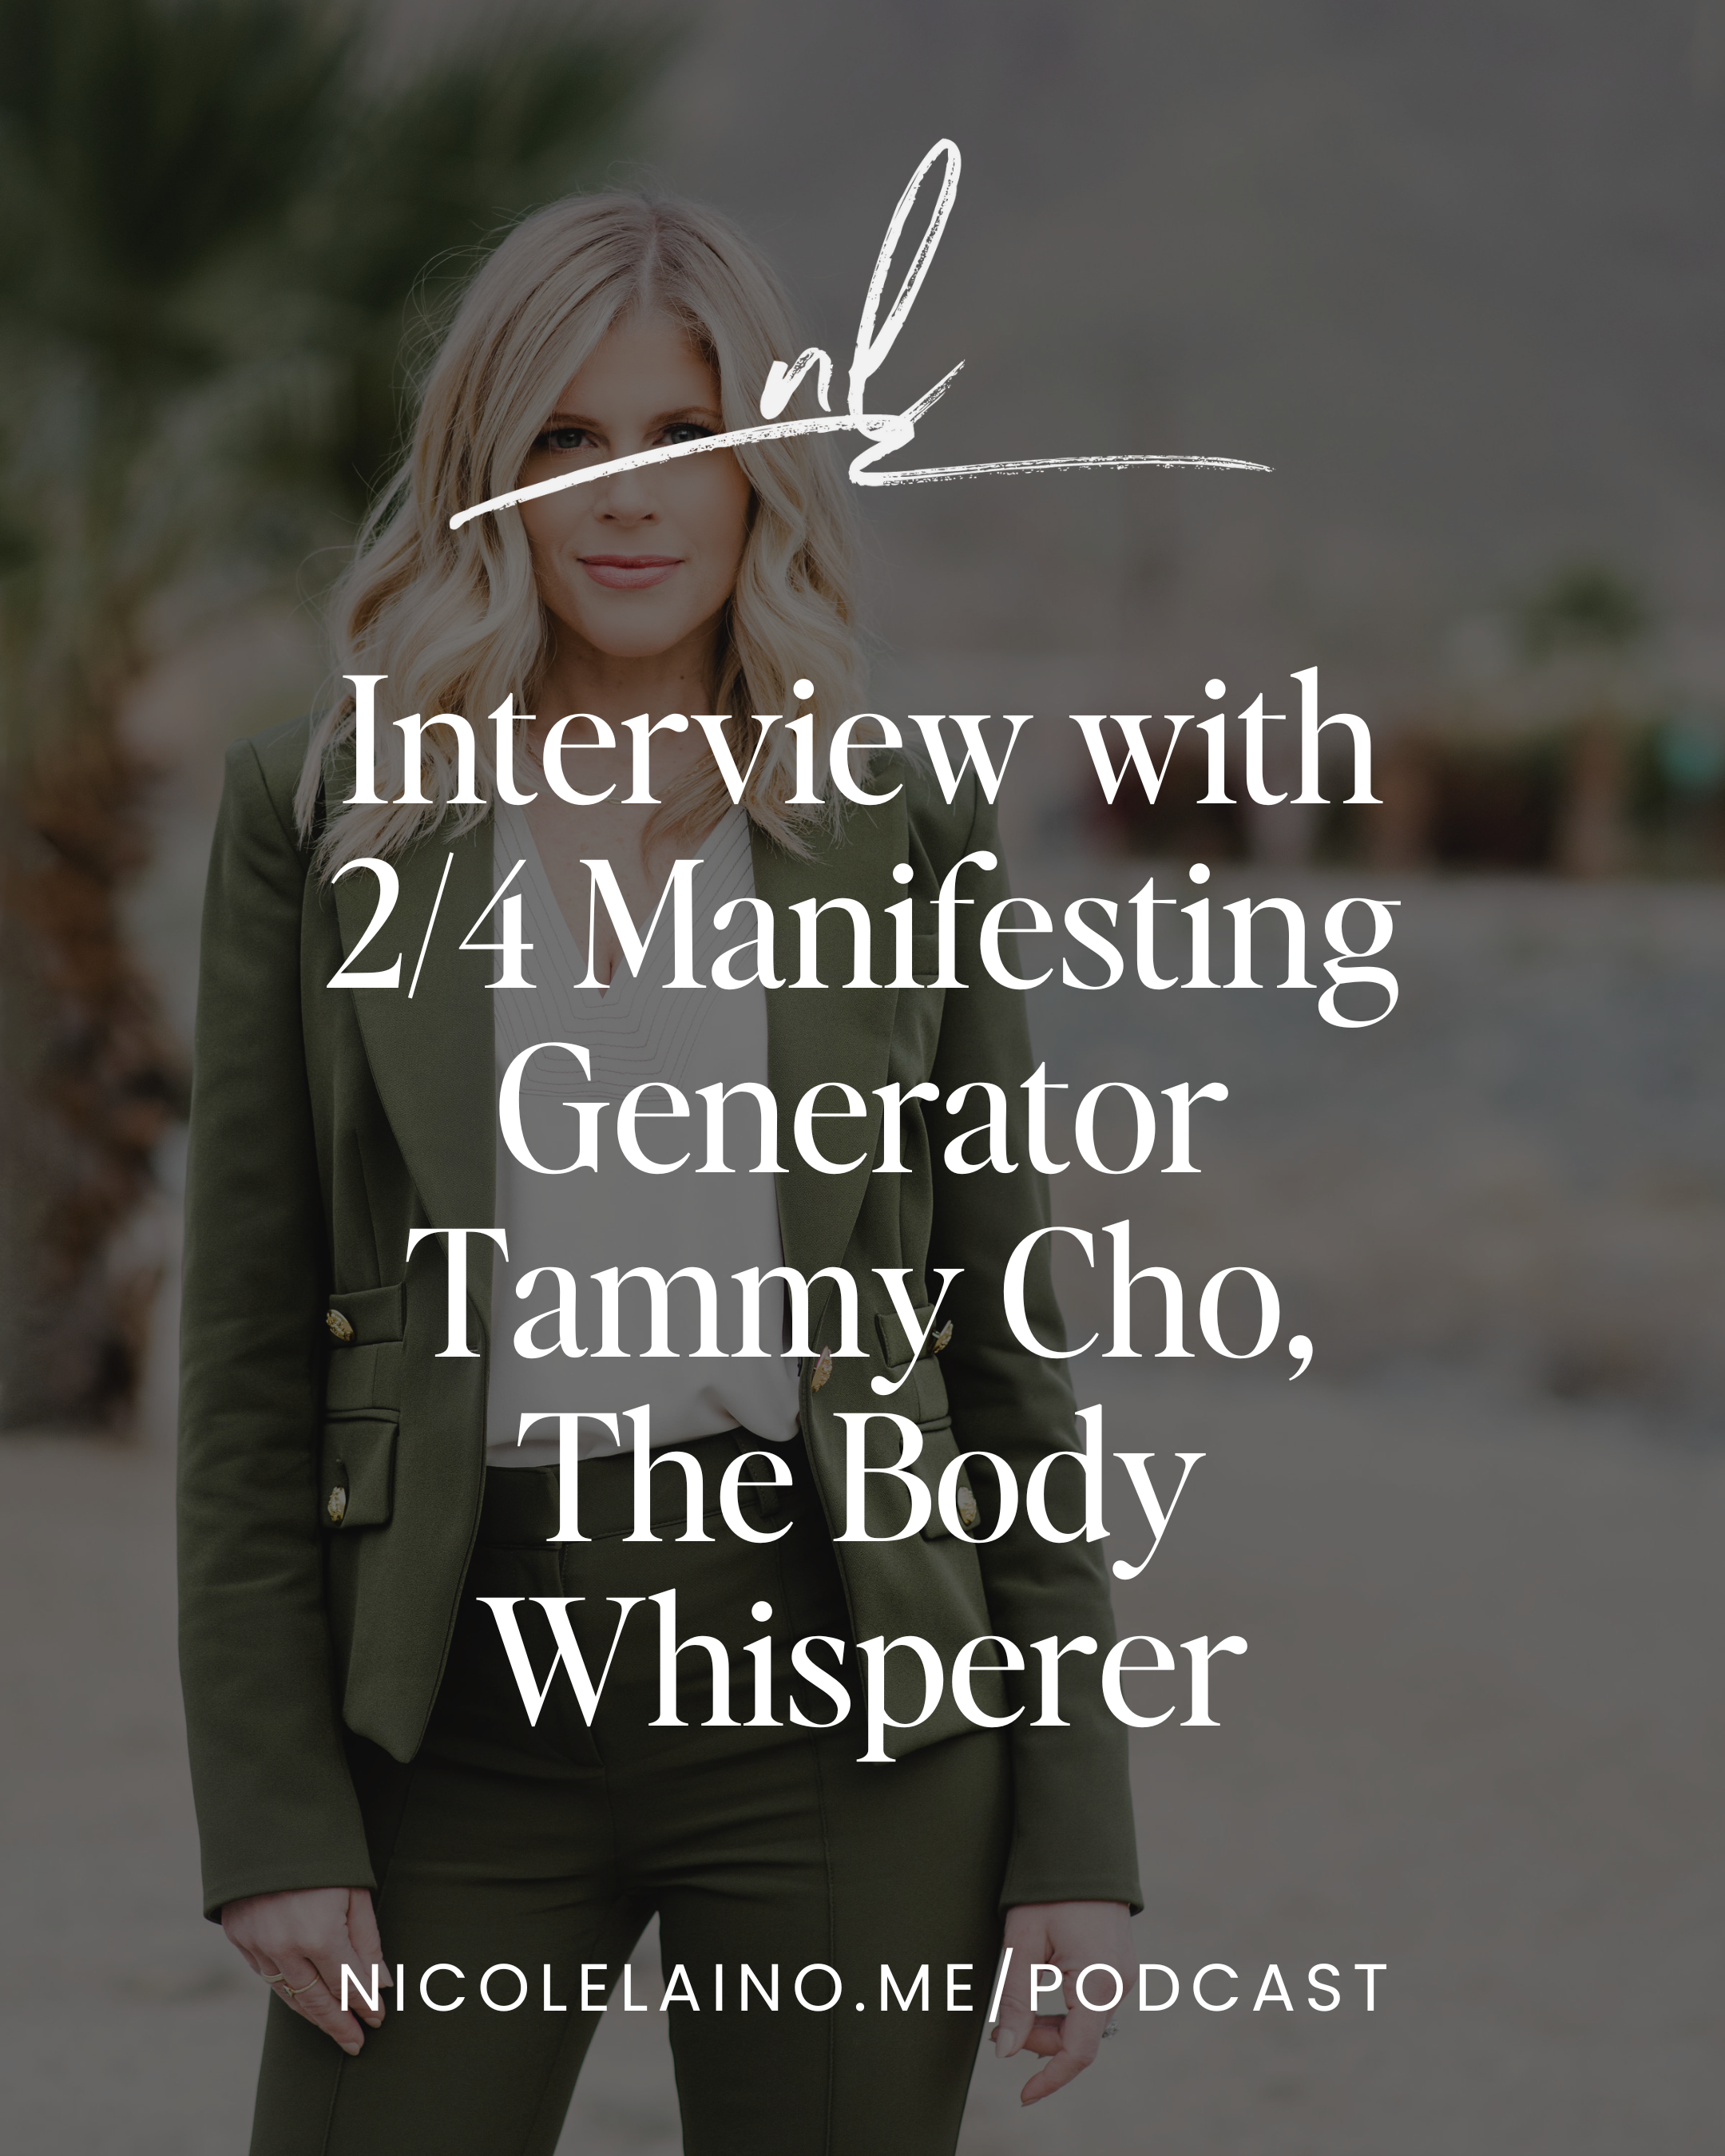 Interview with 2/4 Manifesting Generator Tammy Cho, The Body Whisperer